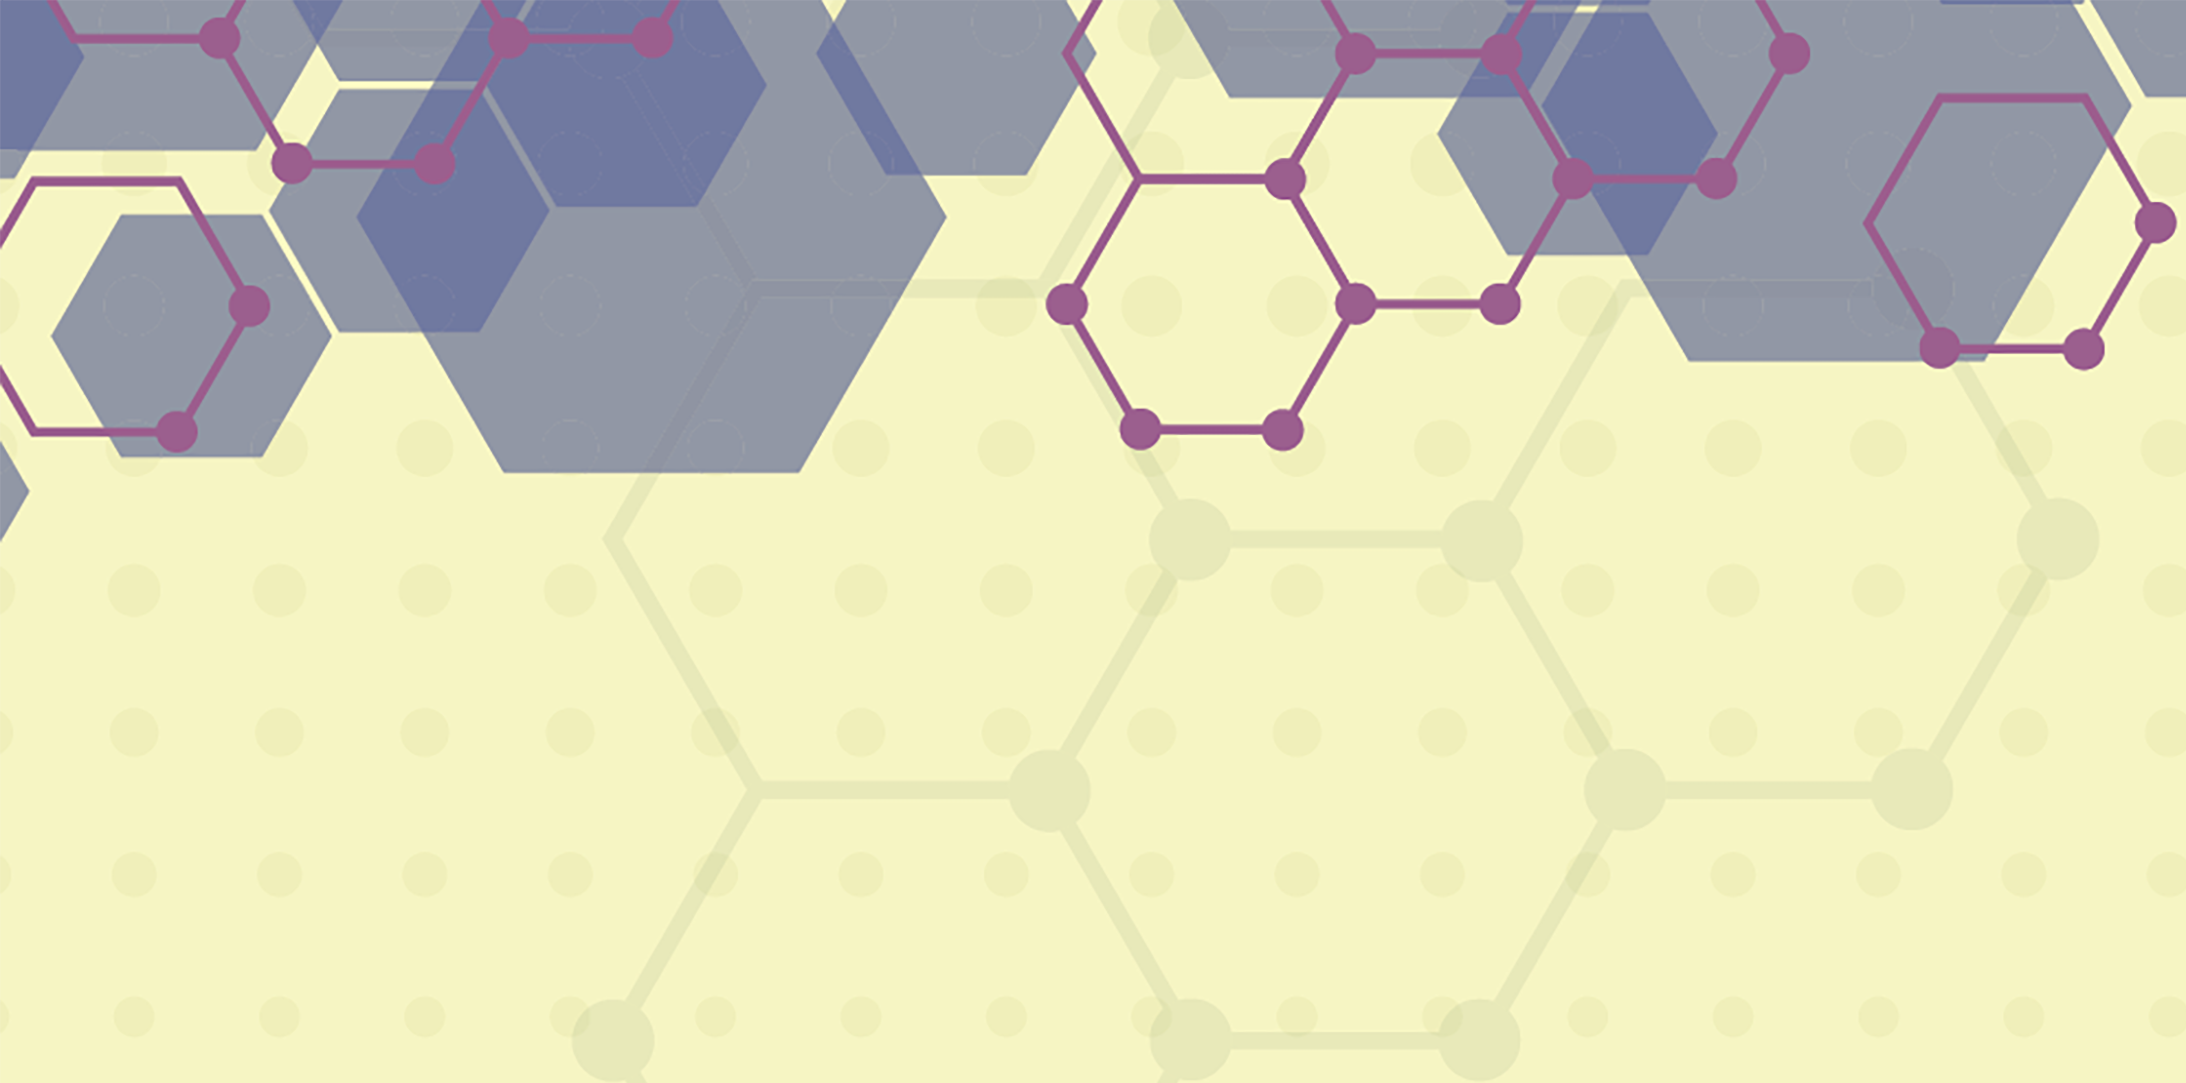 Exhibition graphic design; light yellow background with purple and blue hexagons